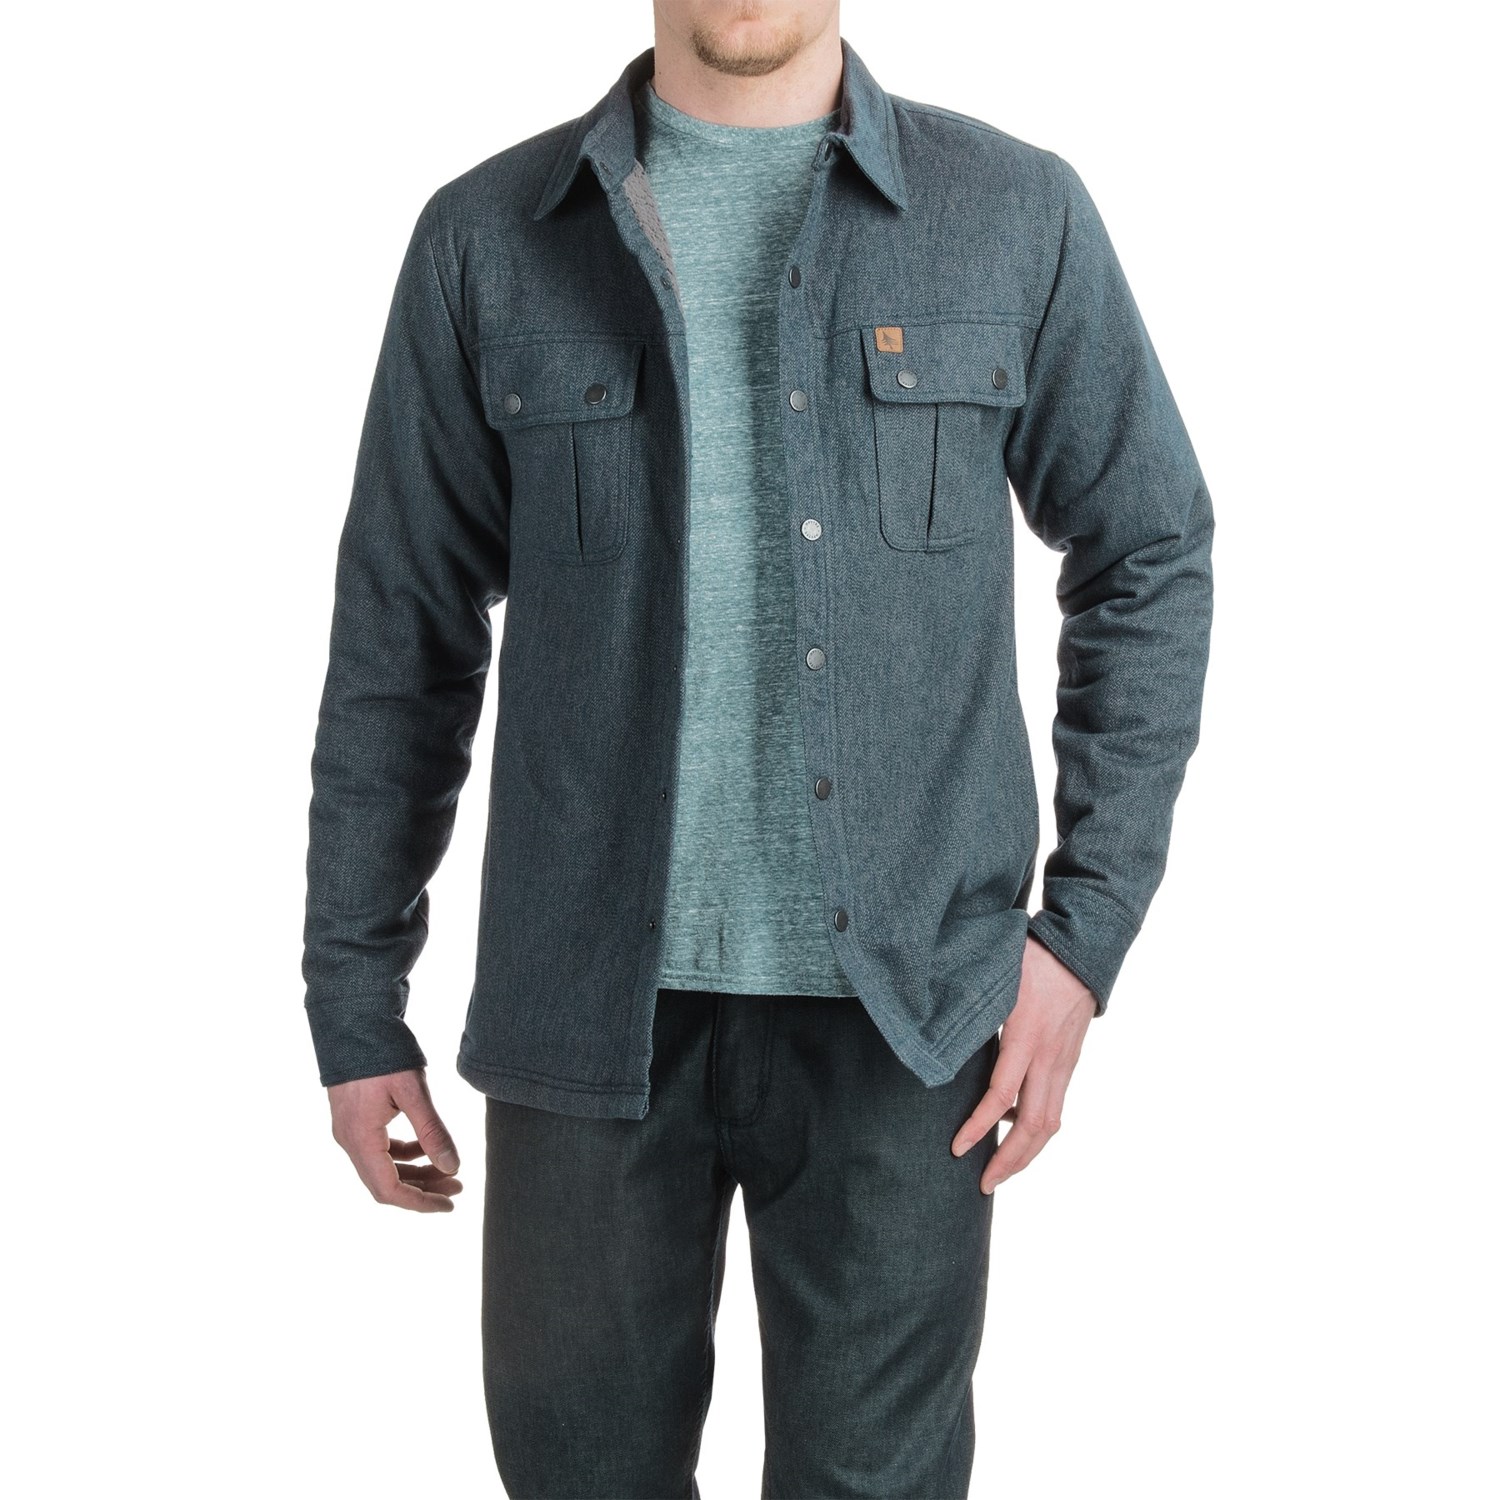 HippyTree Modesto Flannel Shirt Jacket – Sherpa Lined (For Men)